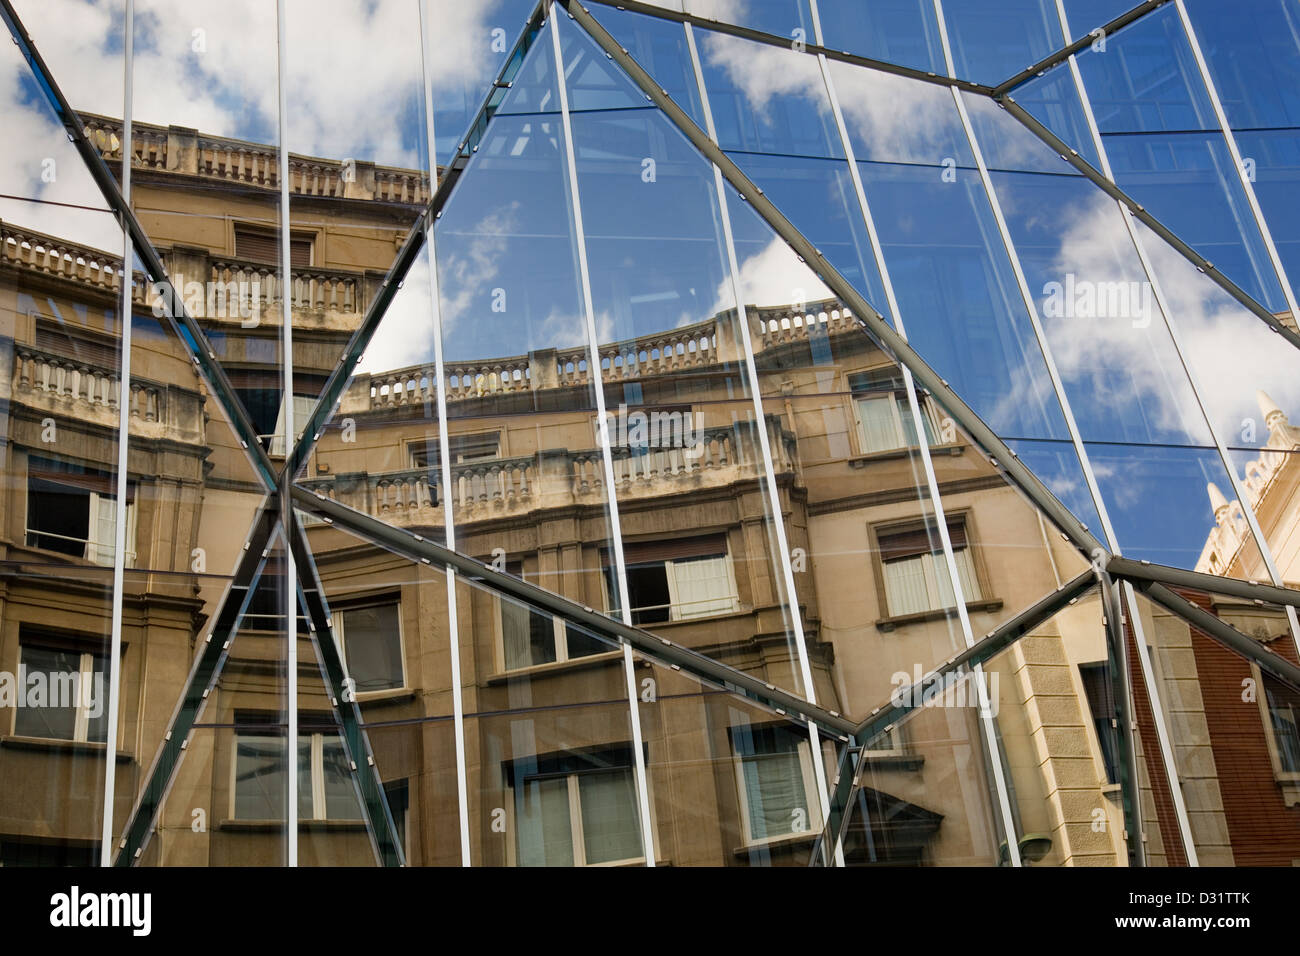 Reflection of an old building in the glass of a modern building Stock Photo